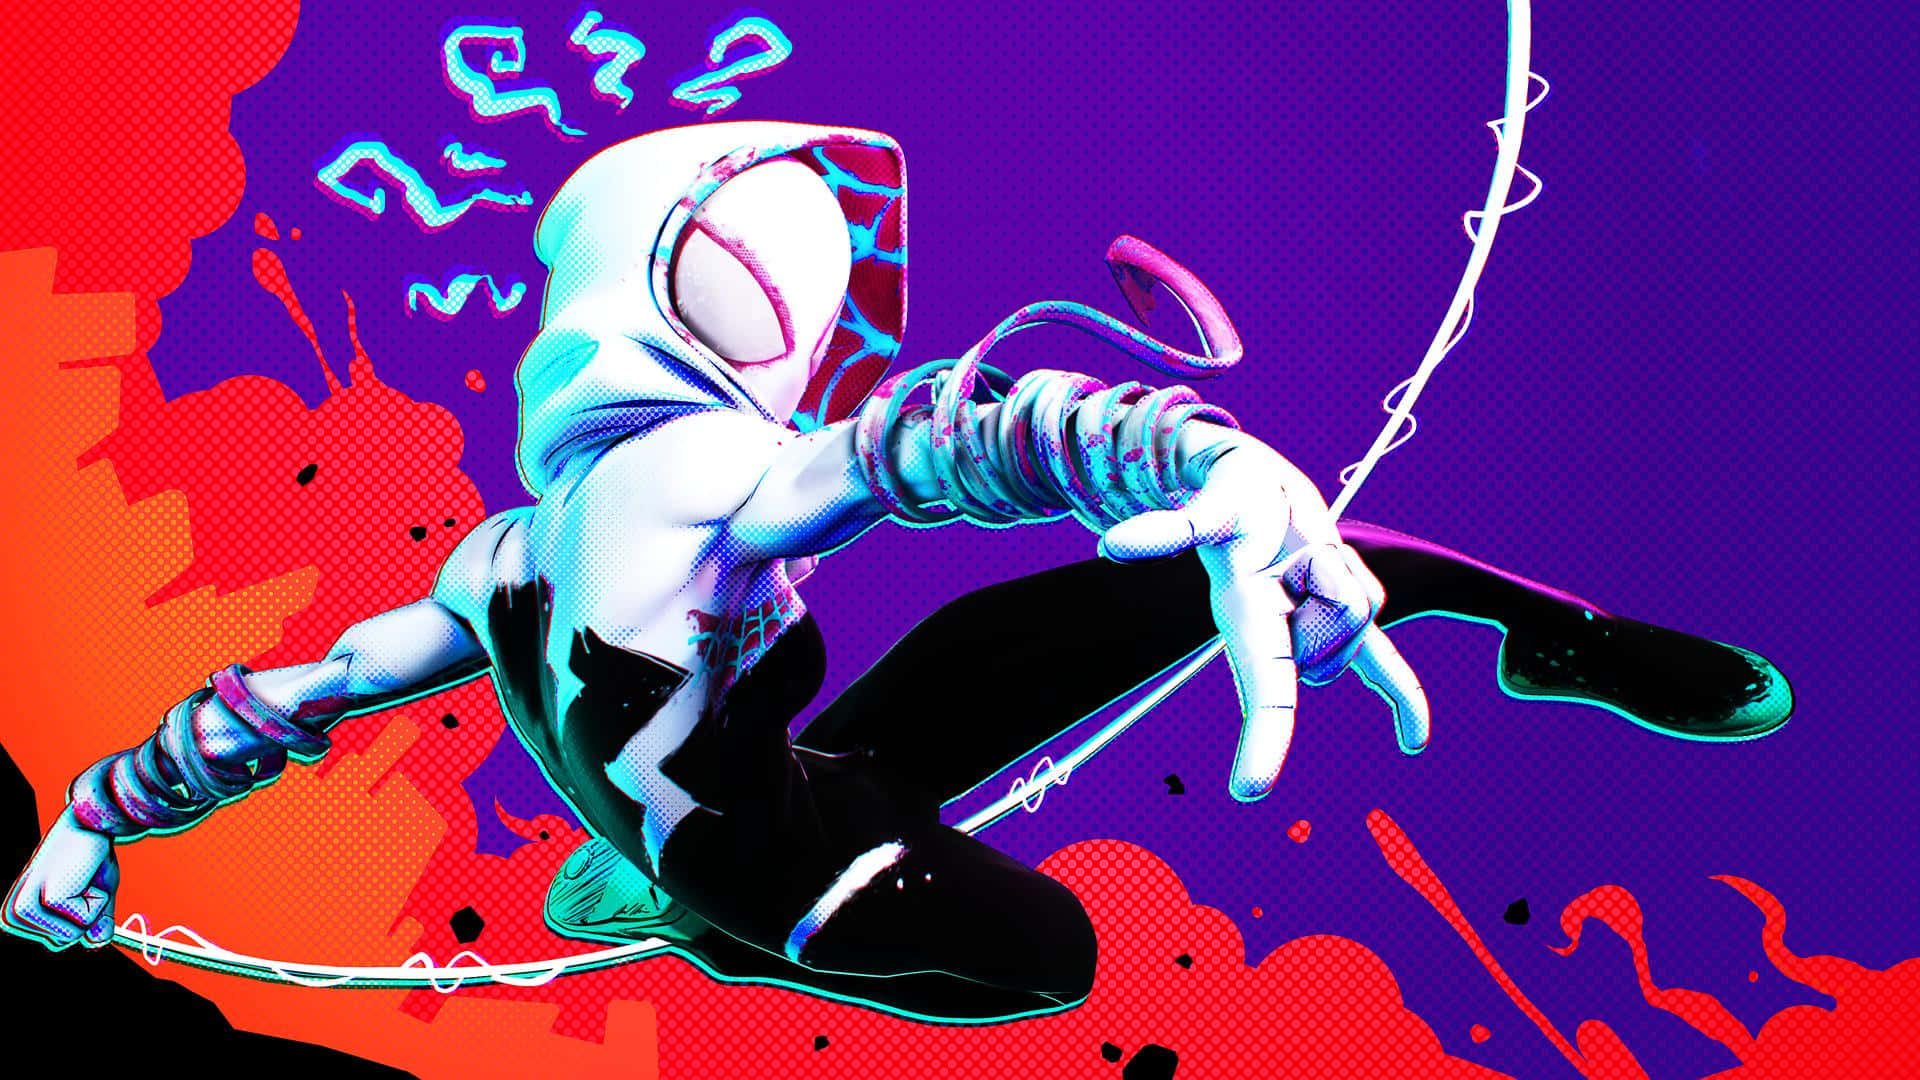 "The Amazing Spider Gwen Swinging Through The City"